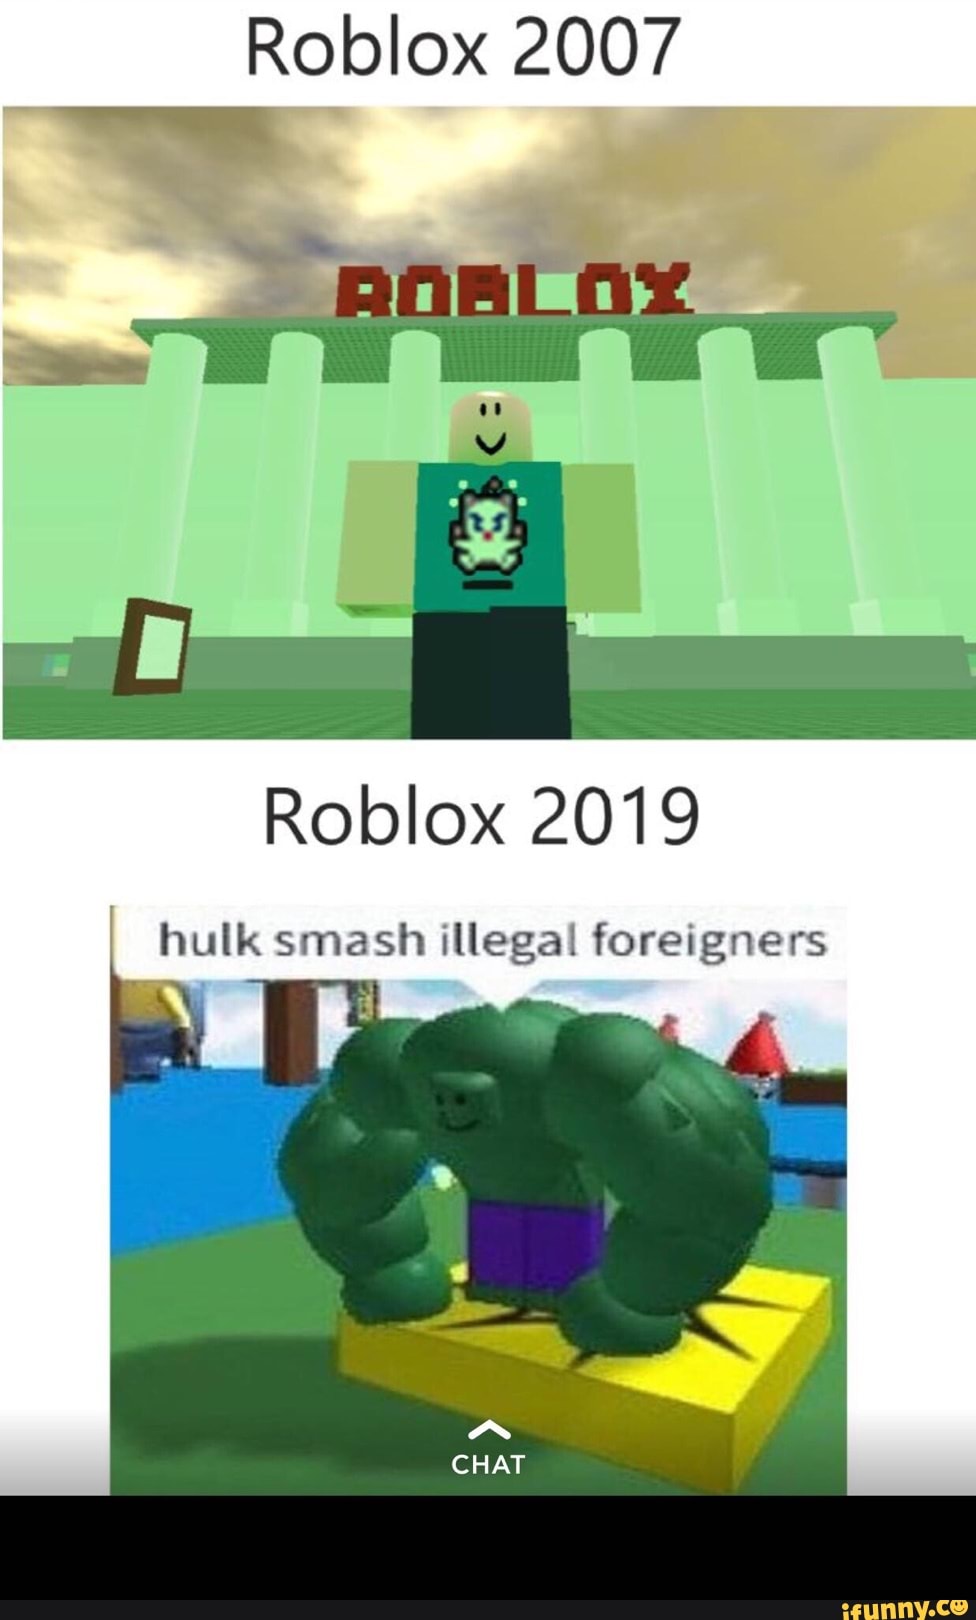 Roblox 2007 Roblox 2019 Hulk Smash Illegal Foreigners A Ifunny - 2007 roblox game